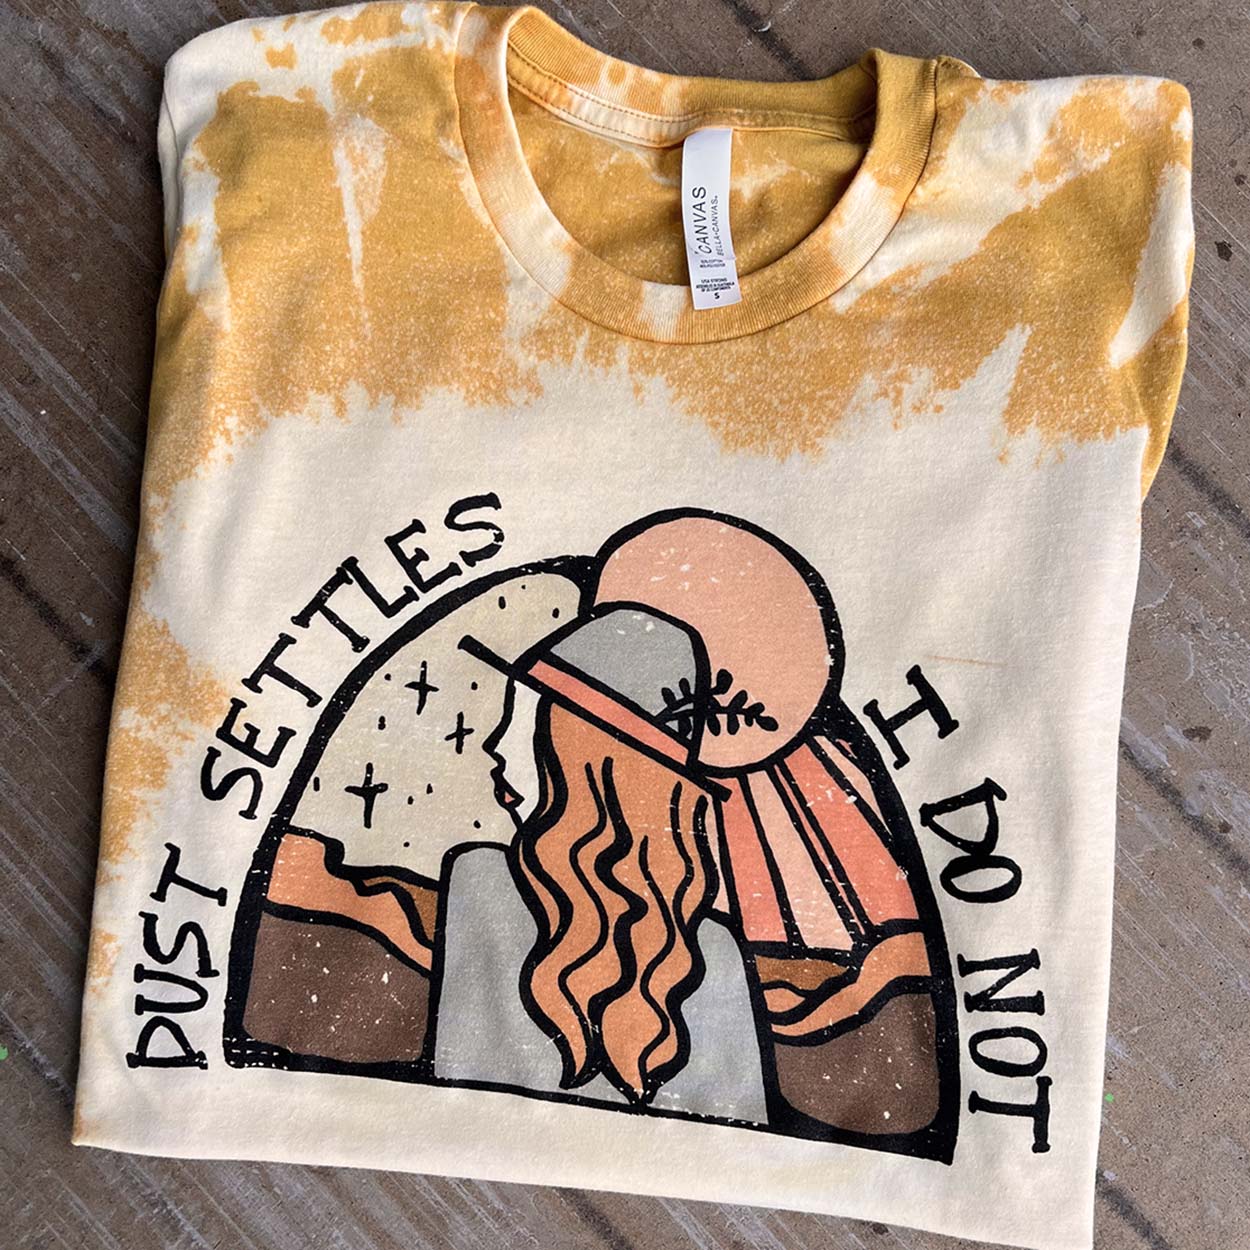 Bleached Dust Settles Tee - bleached, boots, cow, cowgirls, desert, graphic, shirt, snap, stars, tee, tees, vibes, vintage, walkin, western -  - Baha Ranch Western Wear